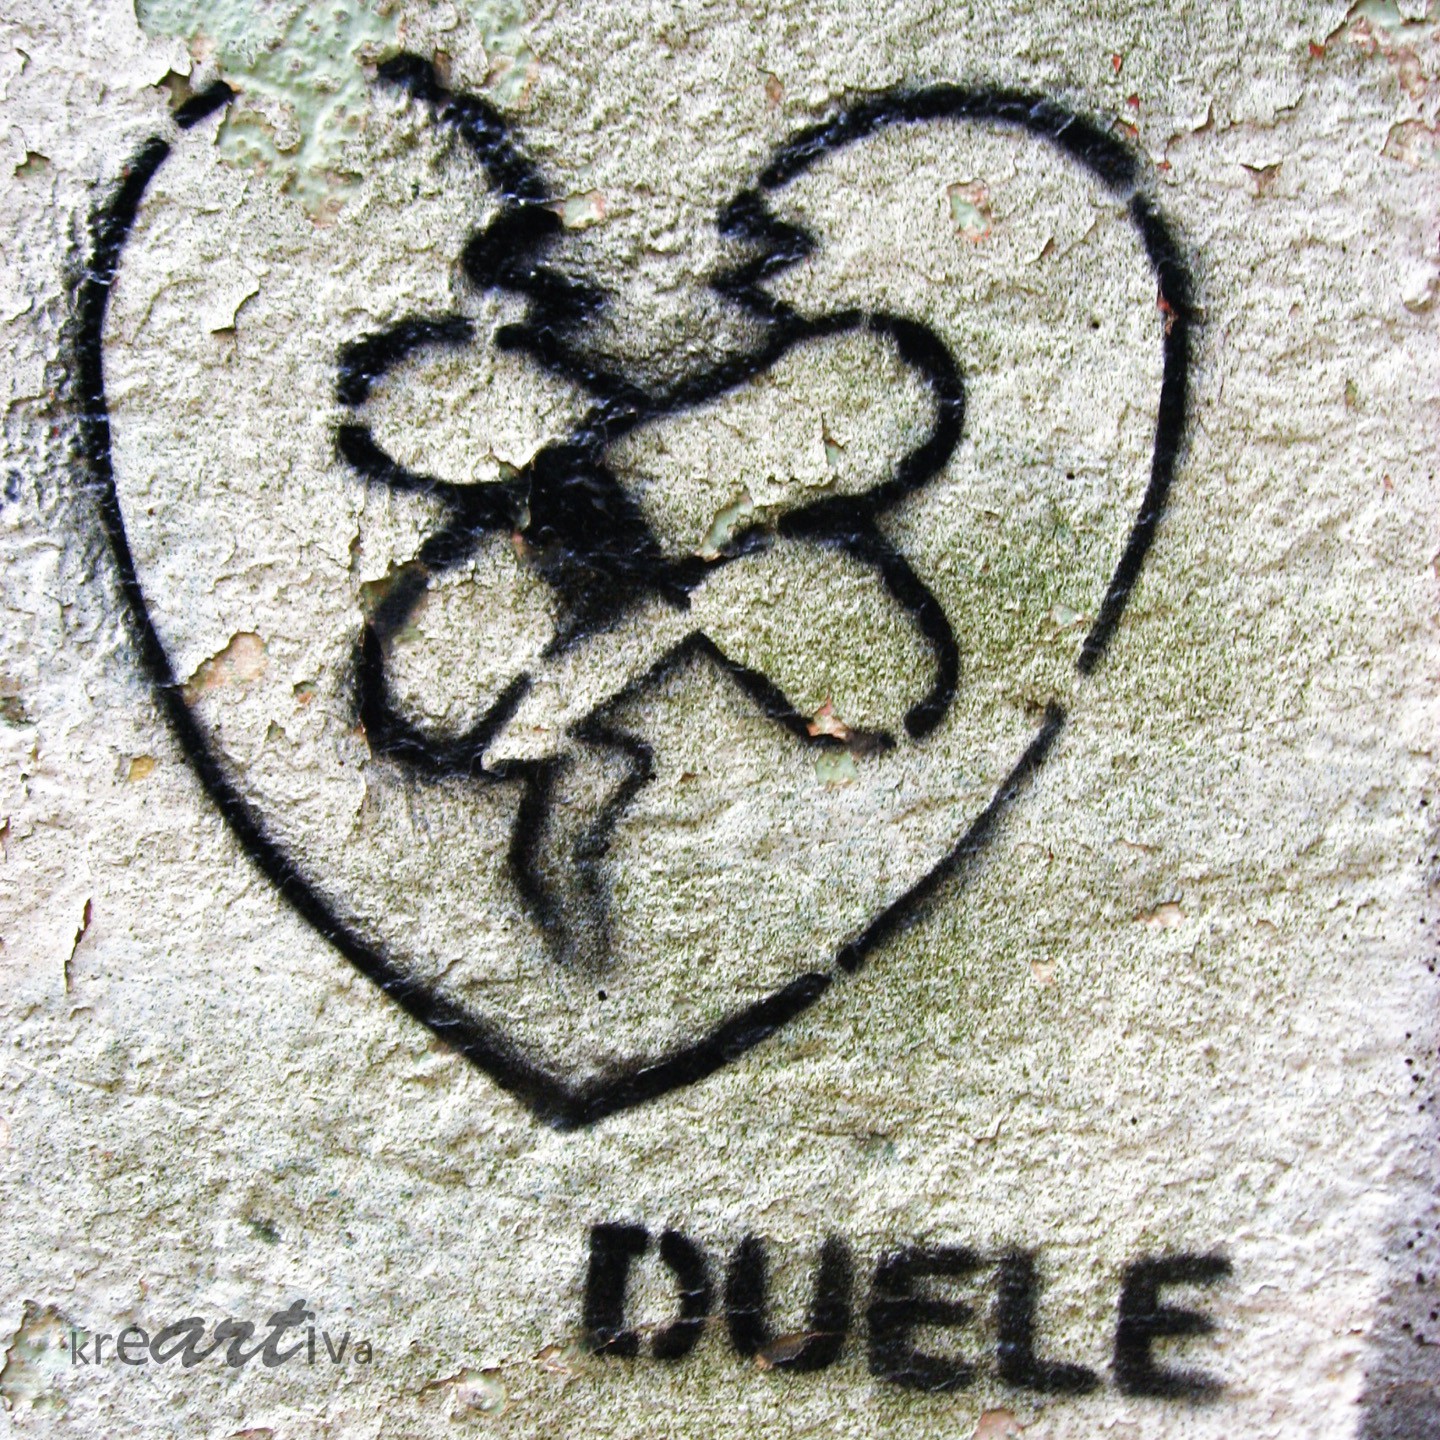 Duele – It hurts